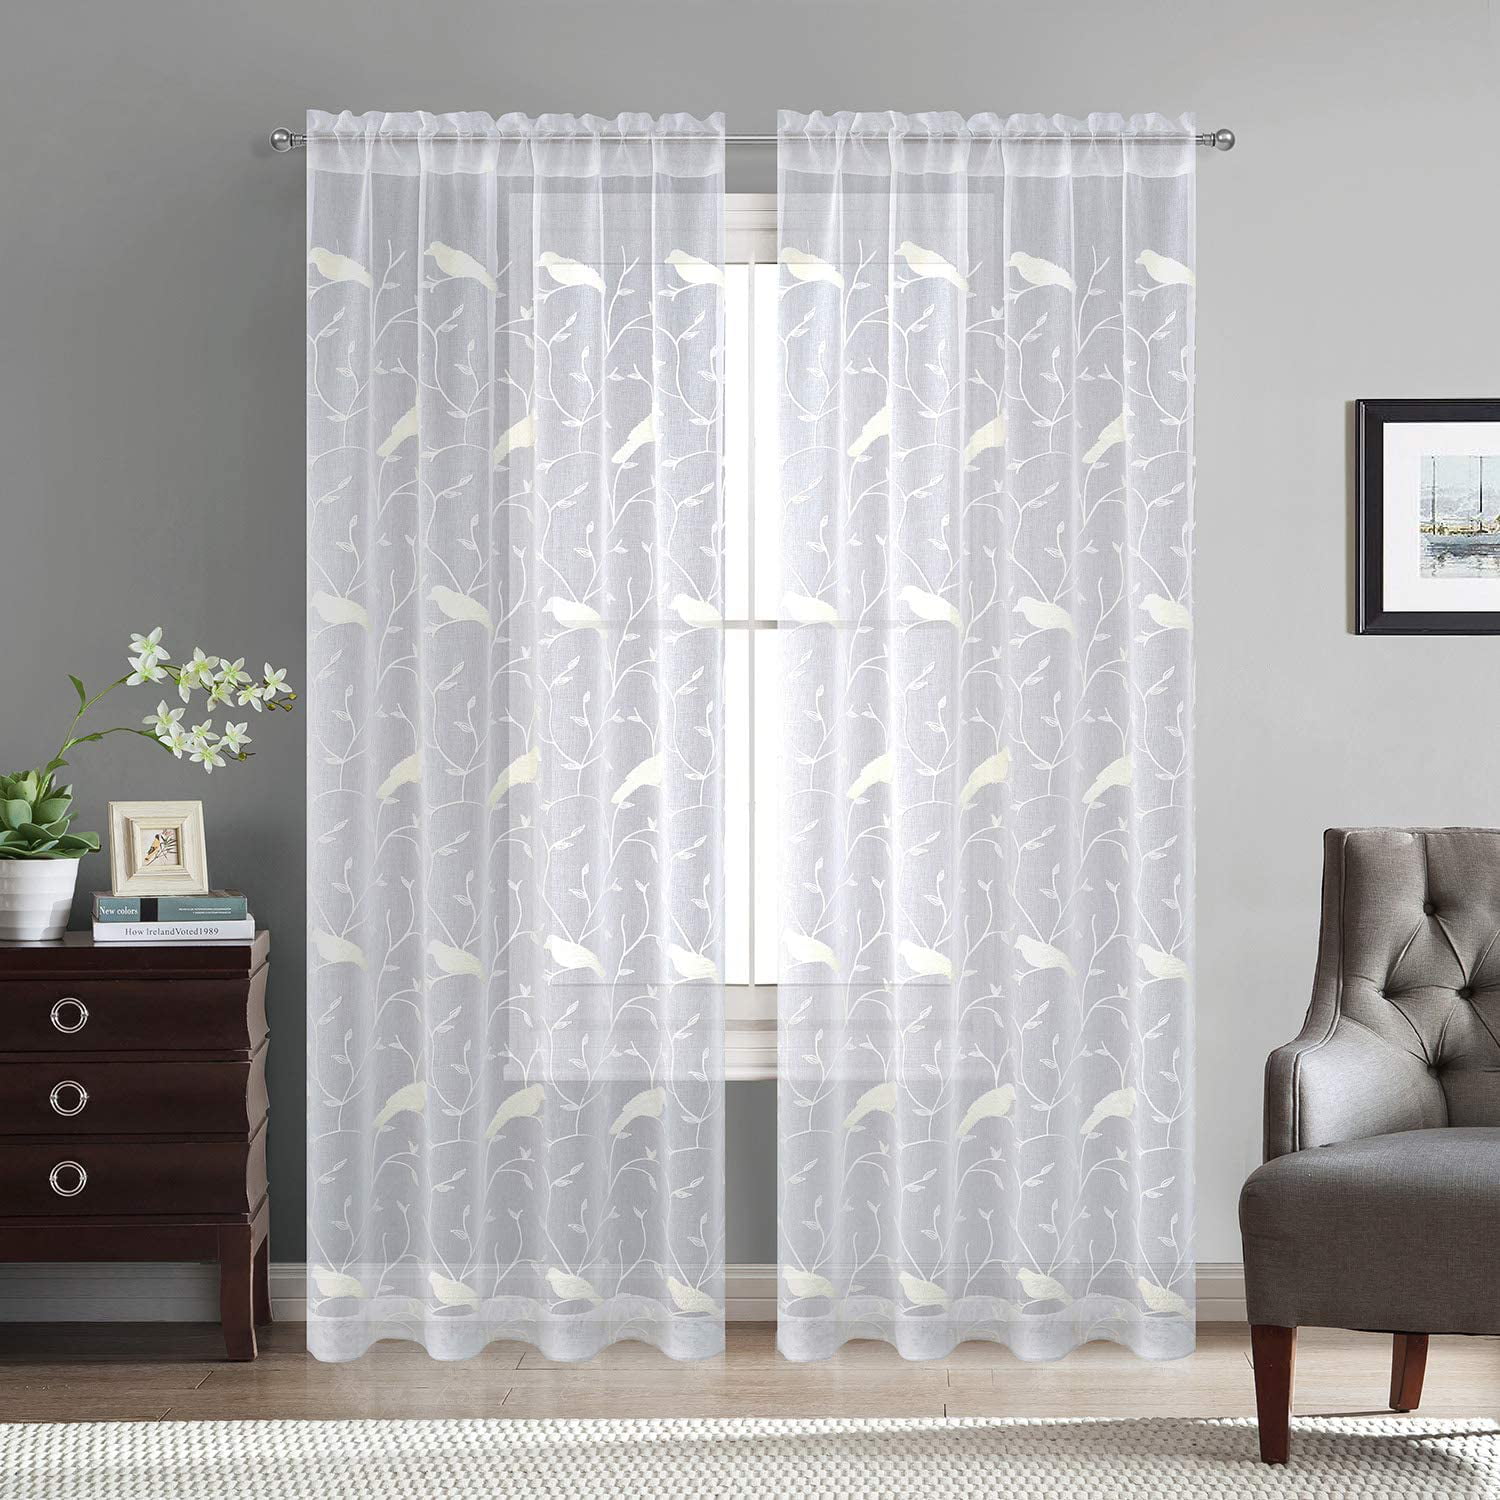 WINYY Floral Embroidery Sheer Curtain for Dingin Room & Kitchen Rod Pocket Top Window Voile Drape Geometric Leaf Curtain Tulle 1 Panel W39 x L63